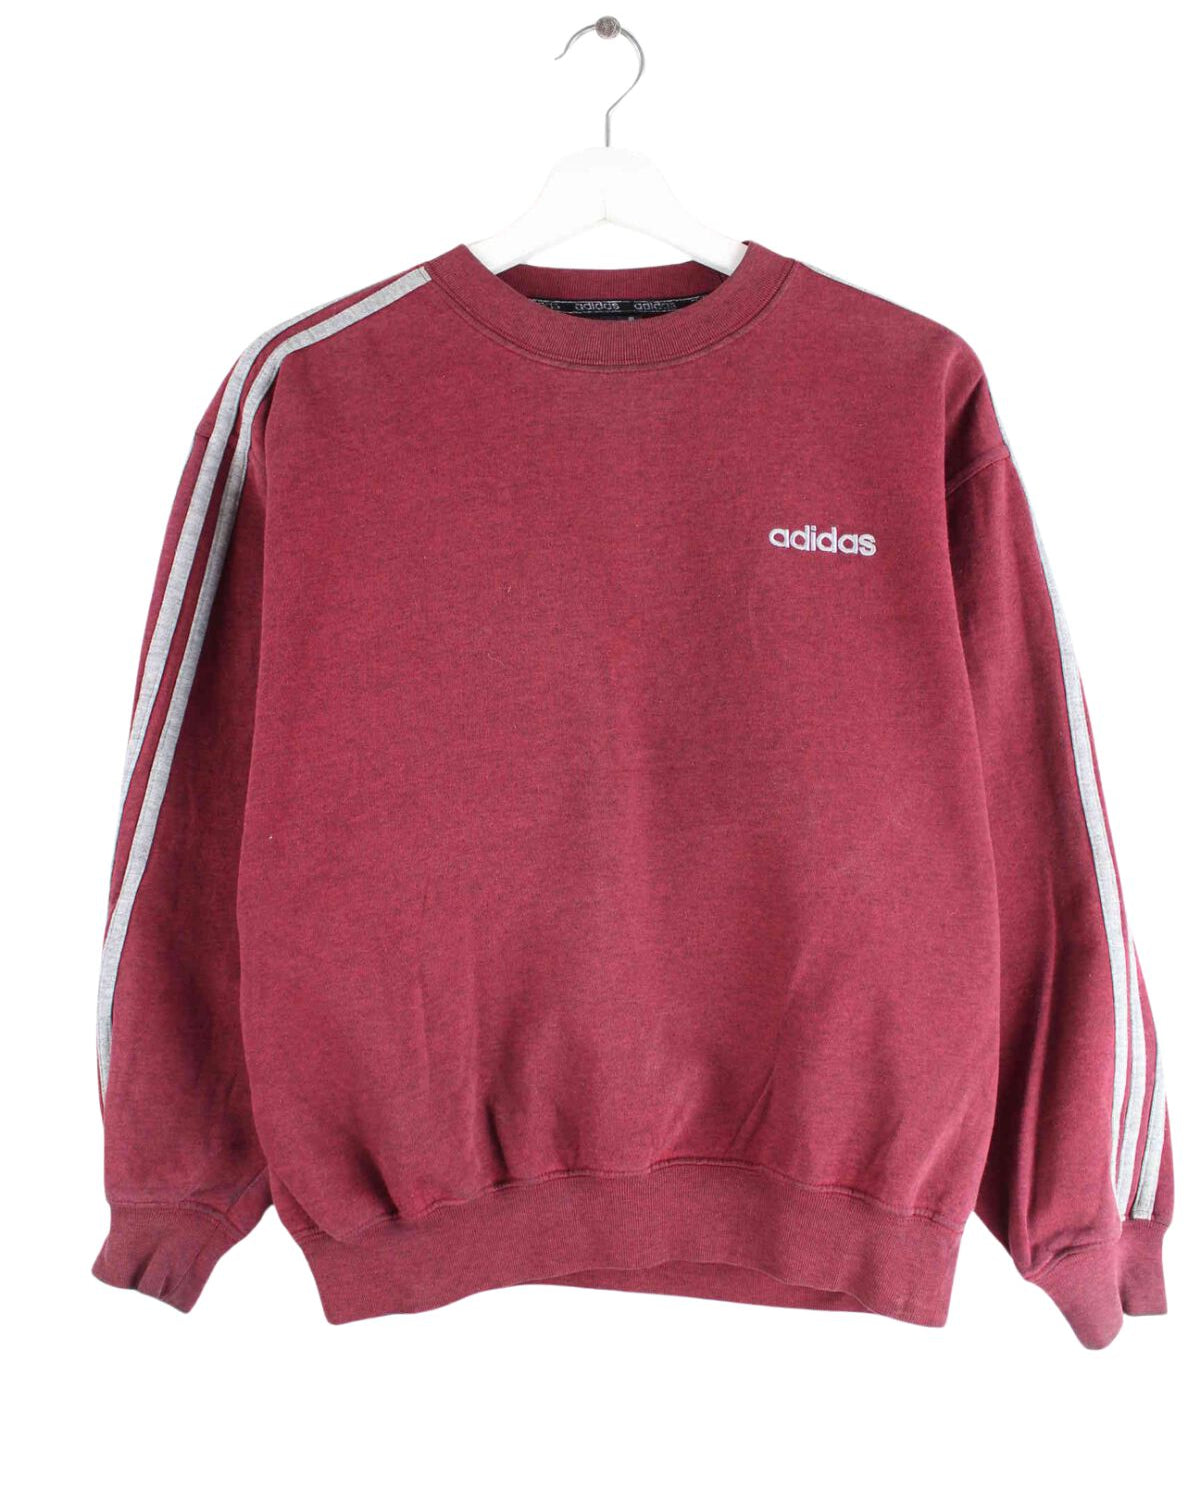 Adidas 80s Vintage 3-Stripes Sweater Rot XS (front image)